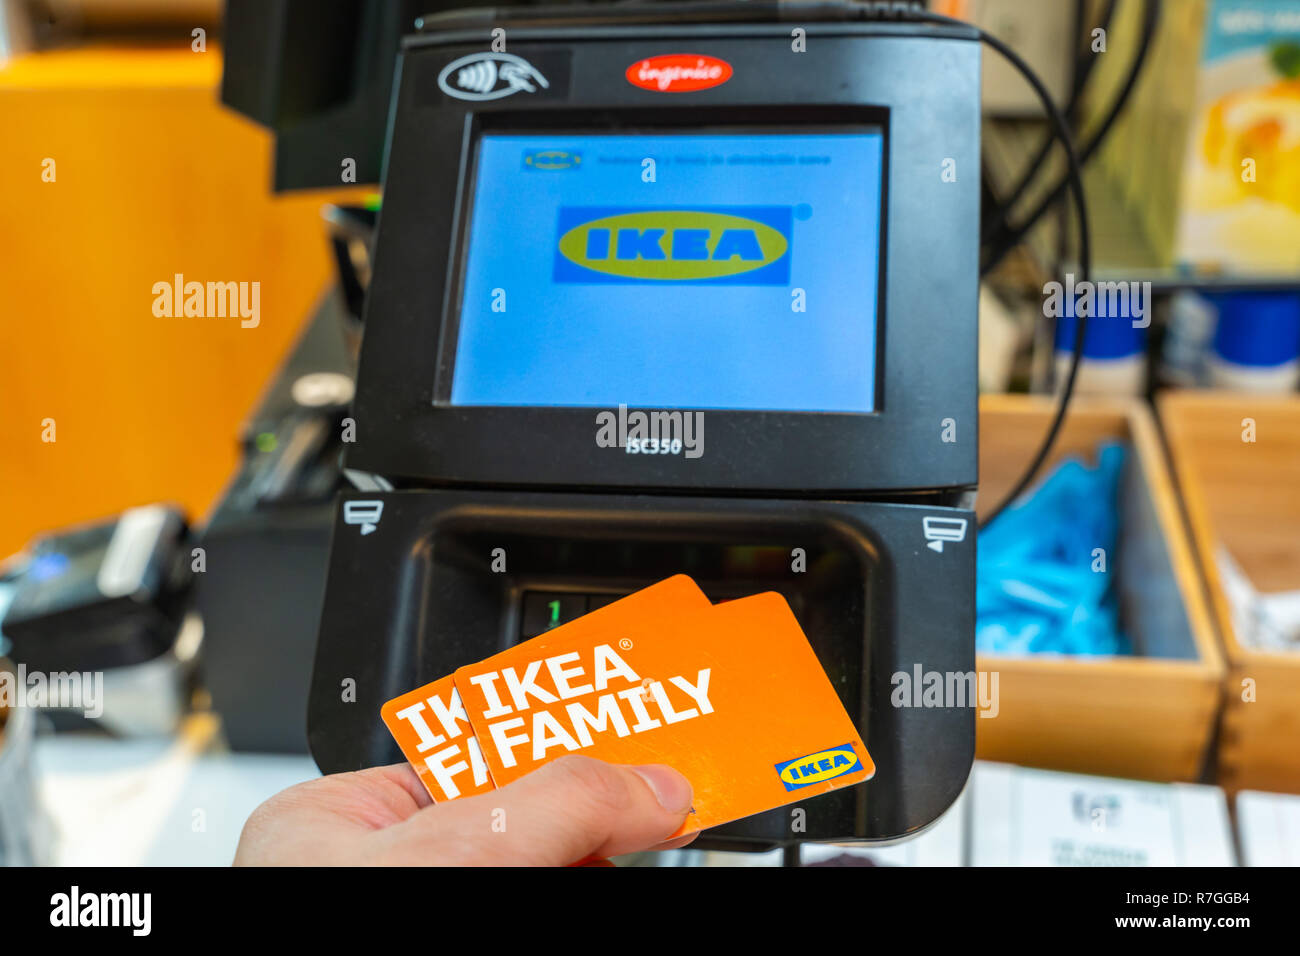 Valencia,Spain - December 09, 2018: Ikea store lot in Alfafar, Valencia. Credit card paymenet terminal (POS Machine) with Ikea name on the screen. Con Stock Photo